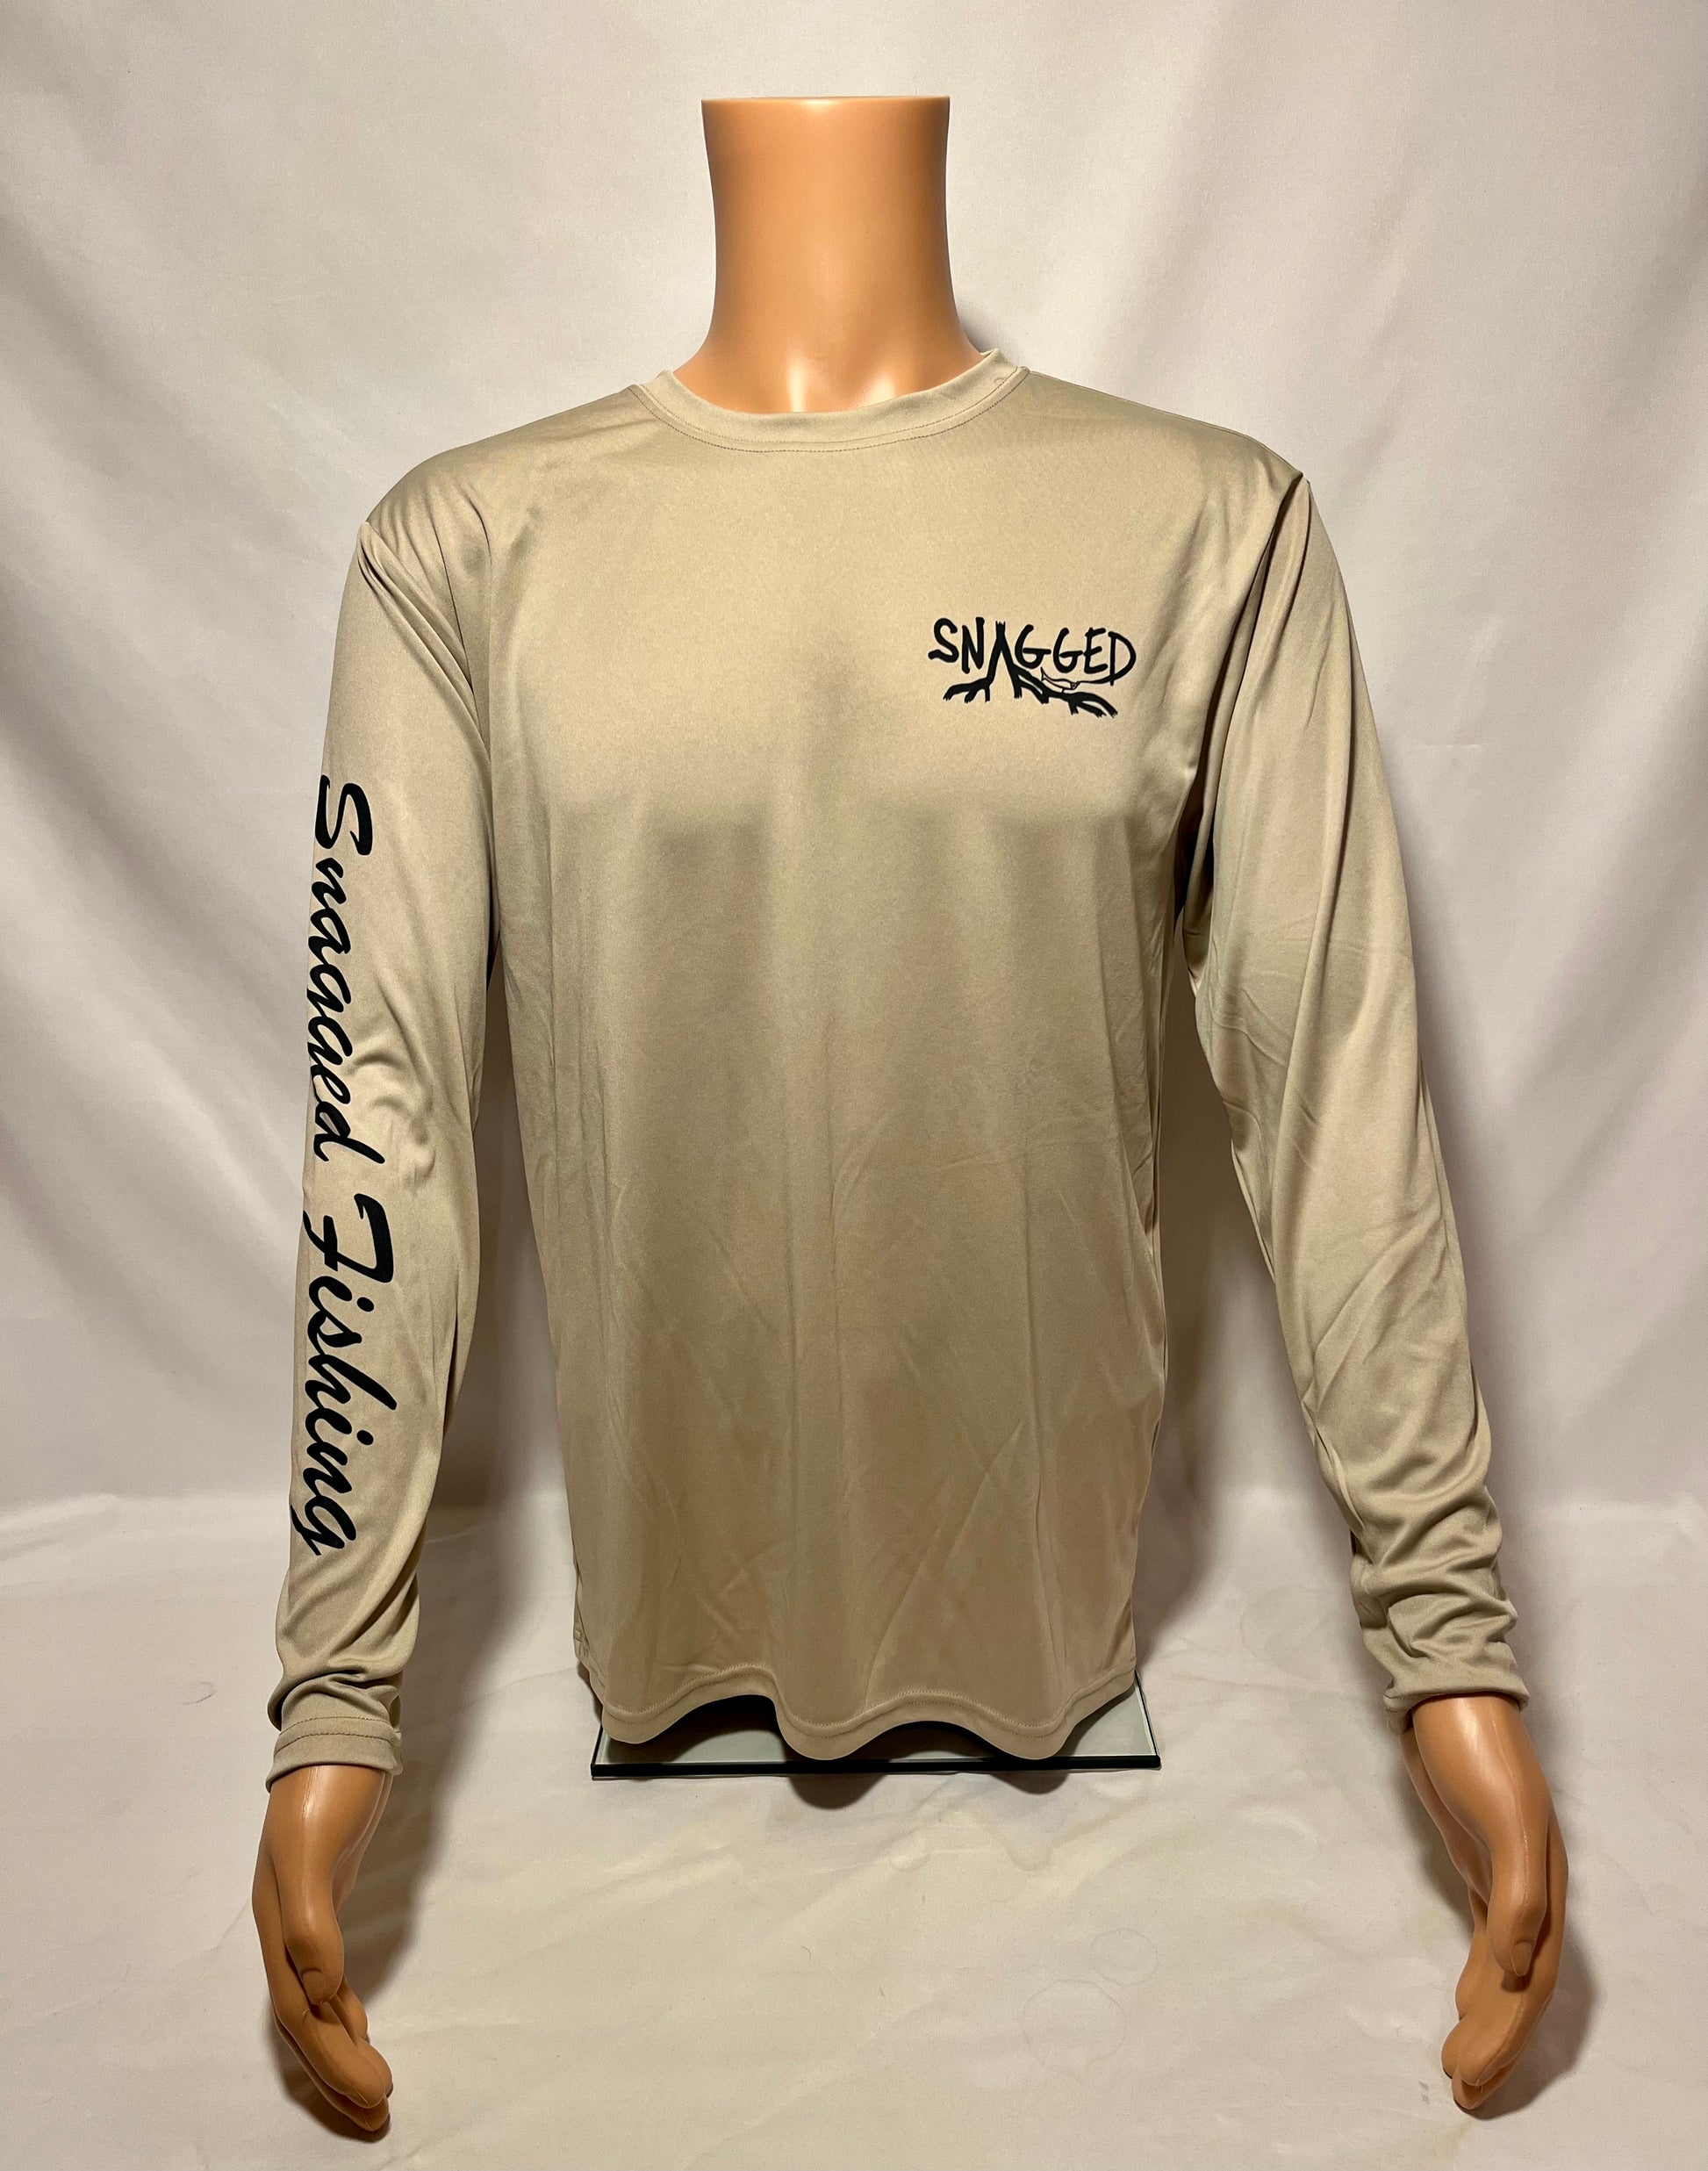 Save the Glades 2.0 – Snagged Fishing Apparel